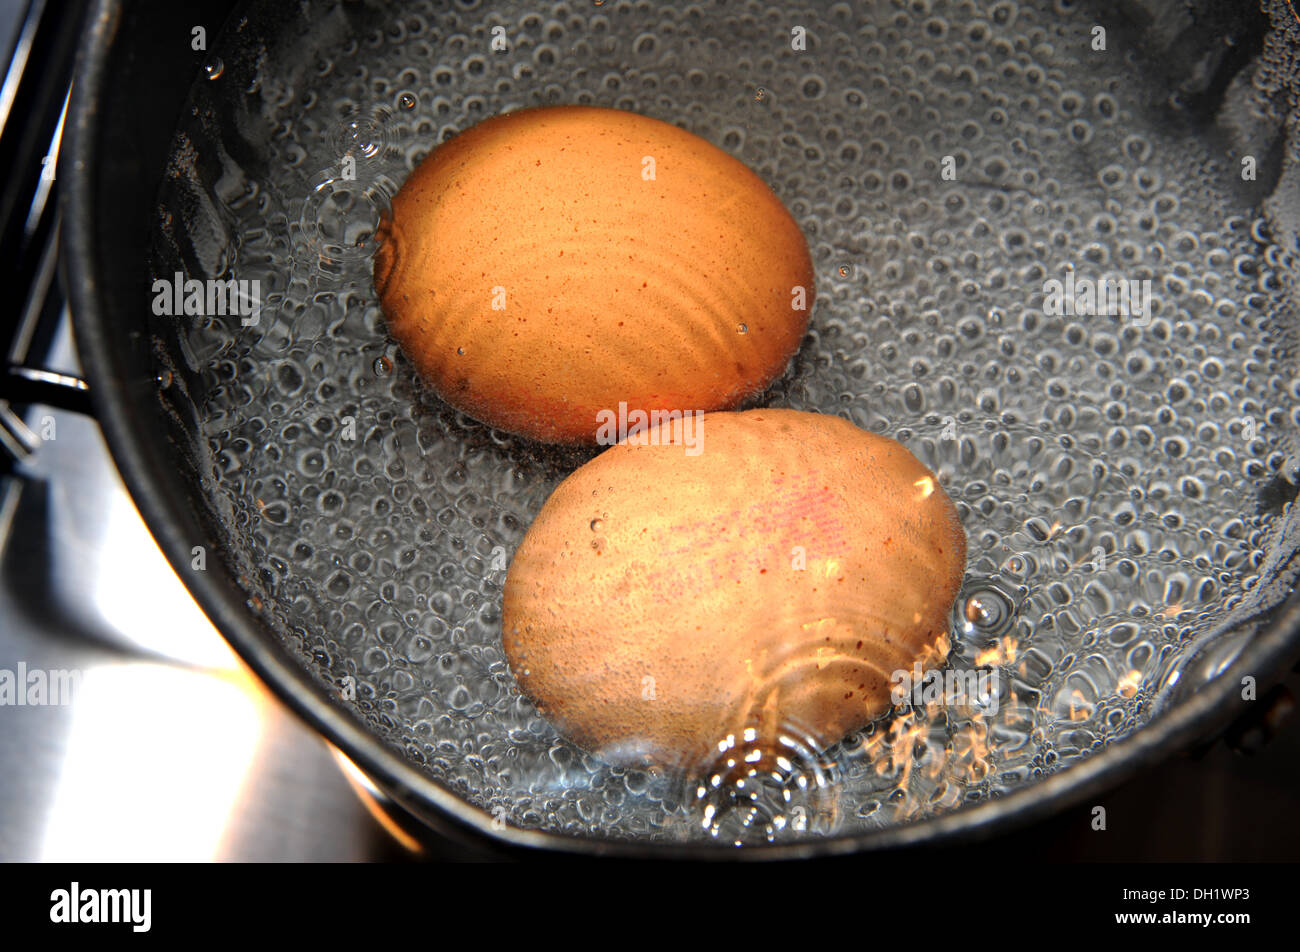 Two free range eggs boiling in a saucepan Stock Photo